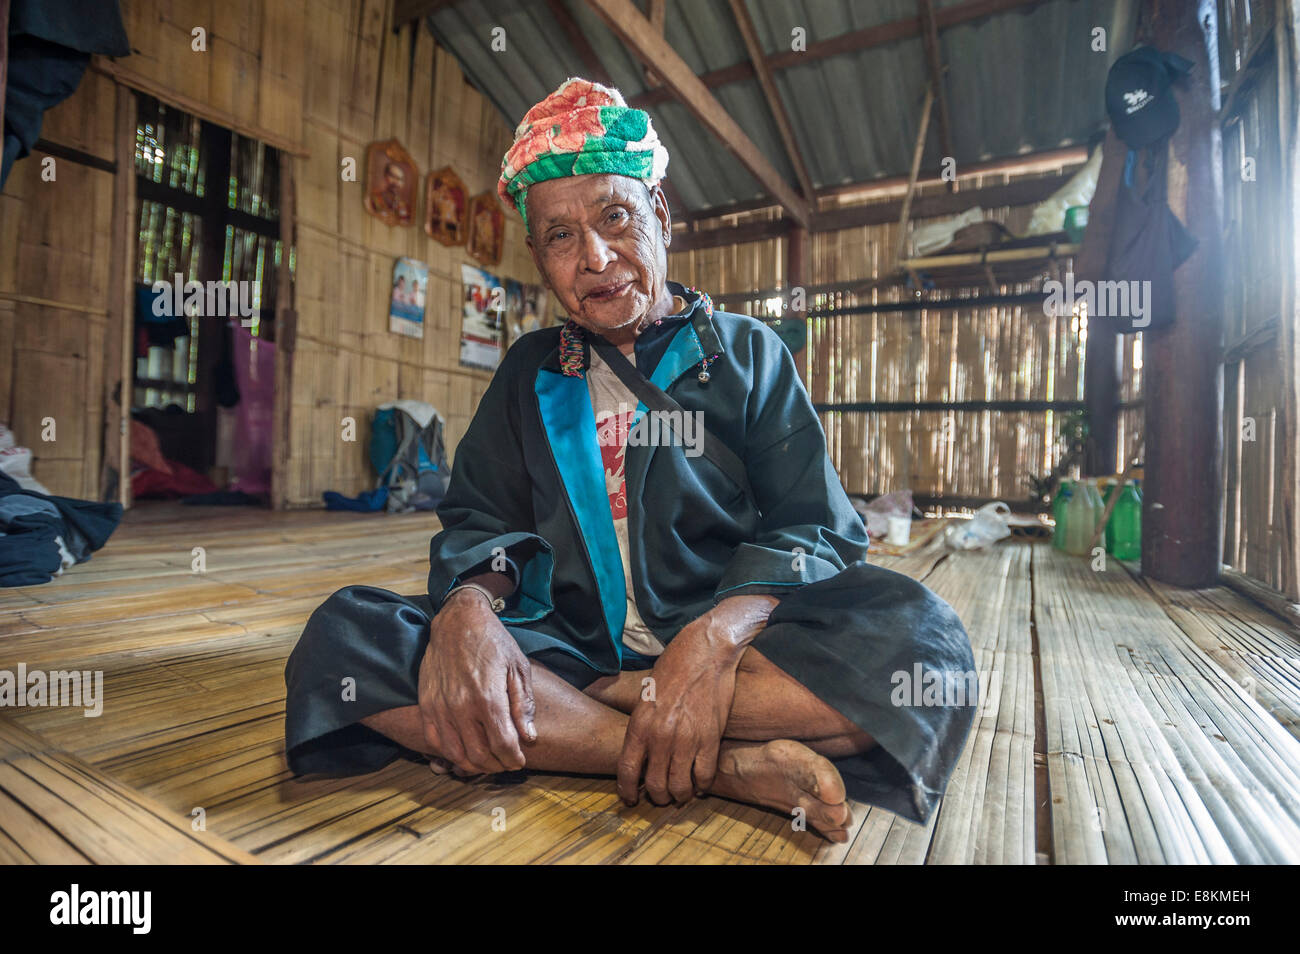 Elderly smiling man from the Lahu people, hill tribe, ethnic minority, sitting on a veranda, Mae Hong Song Province Stock Photo